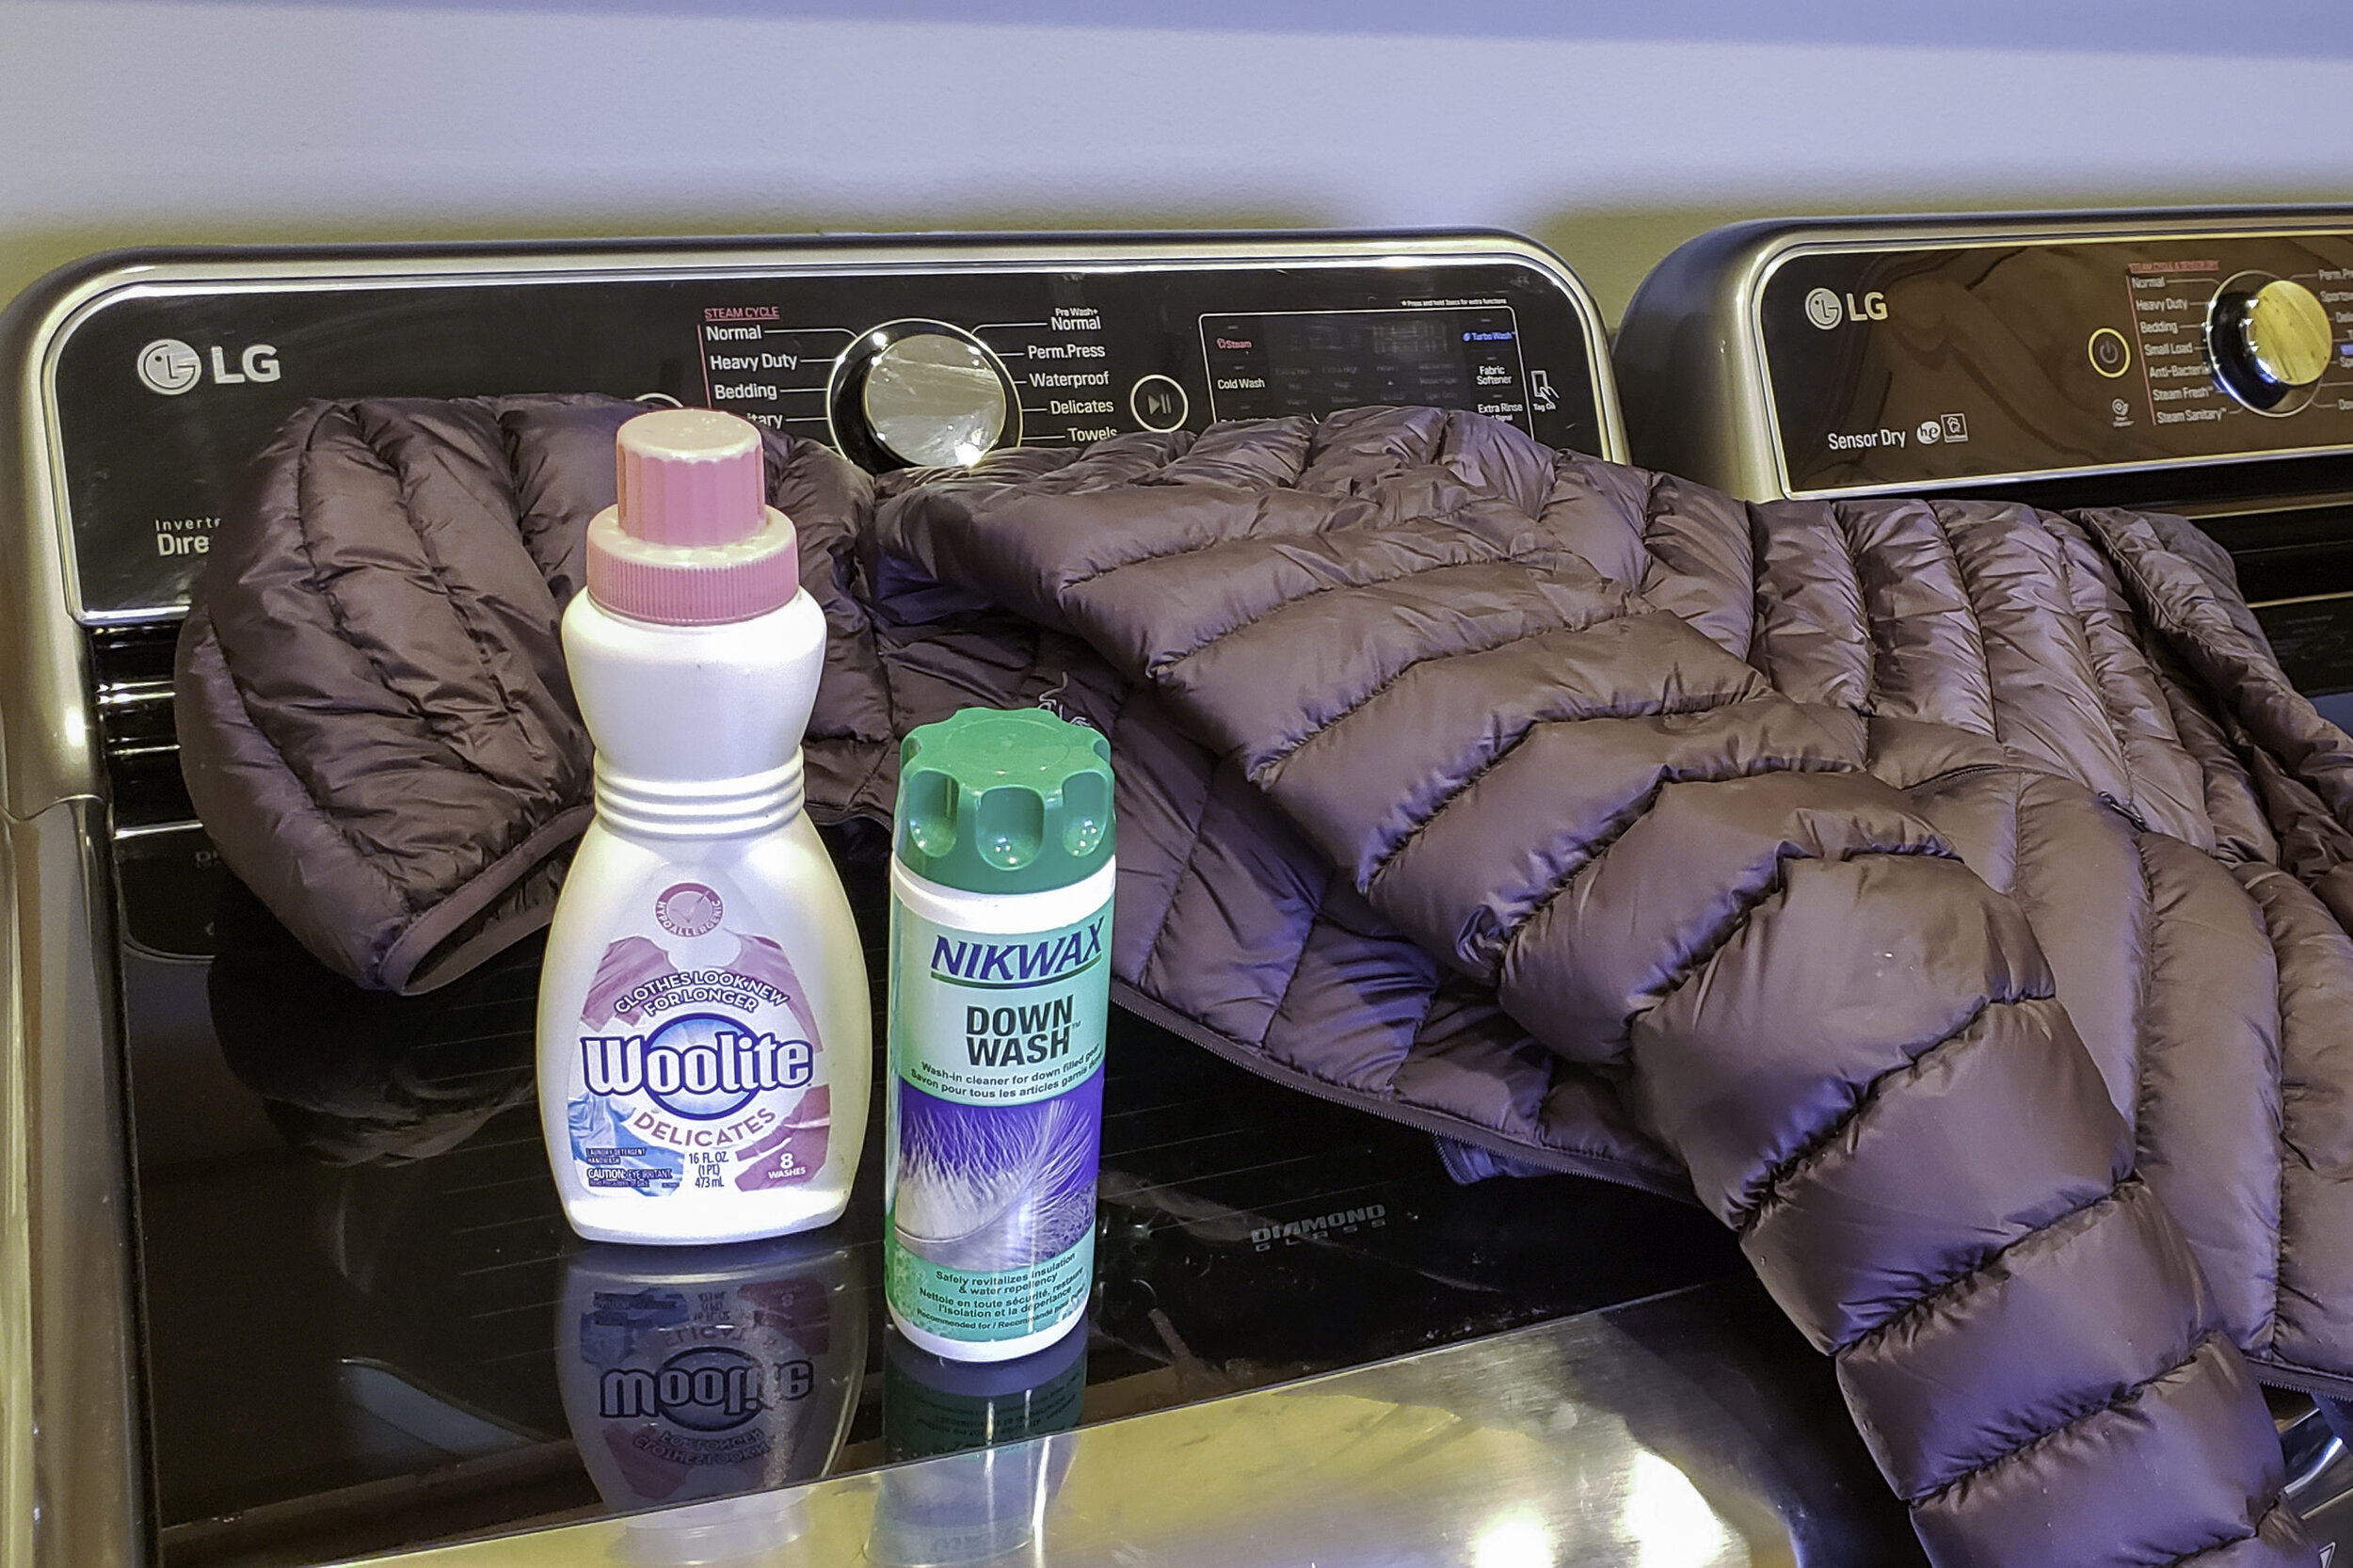 Down Jacket Detergent Dry Foam Detergent for Laundry Laundry